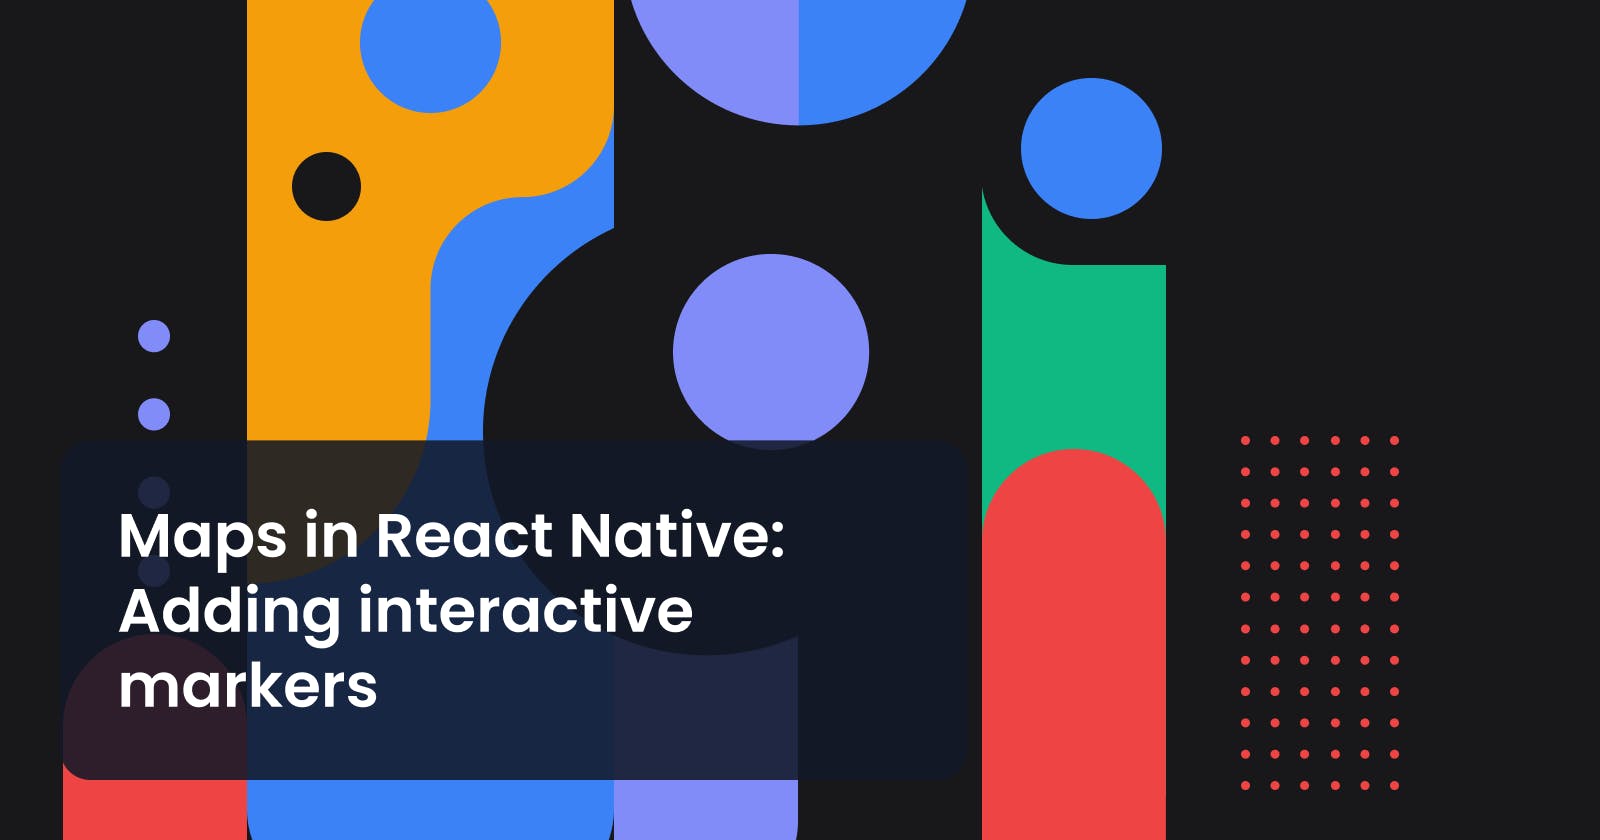 Maps in React Native: Adding interactive markers